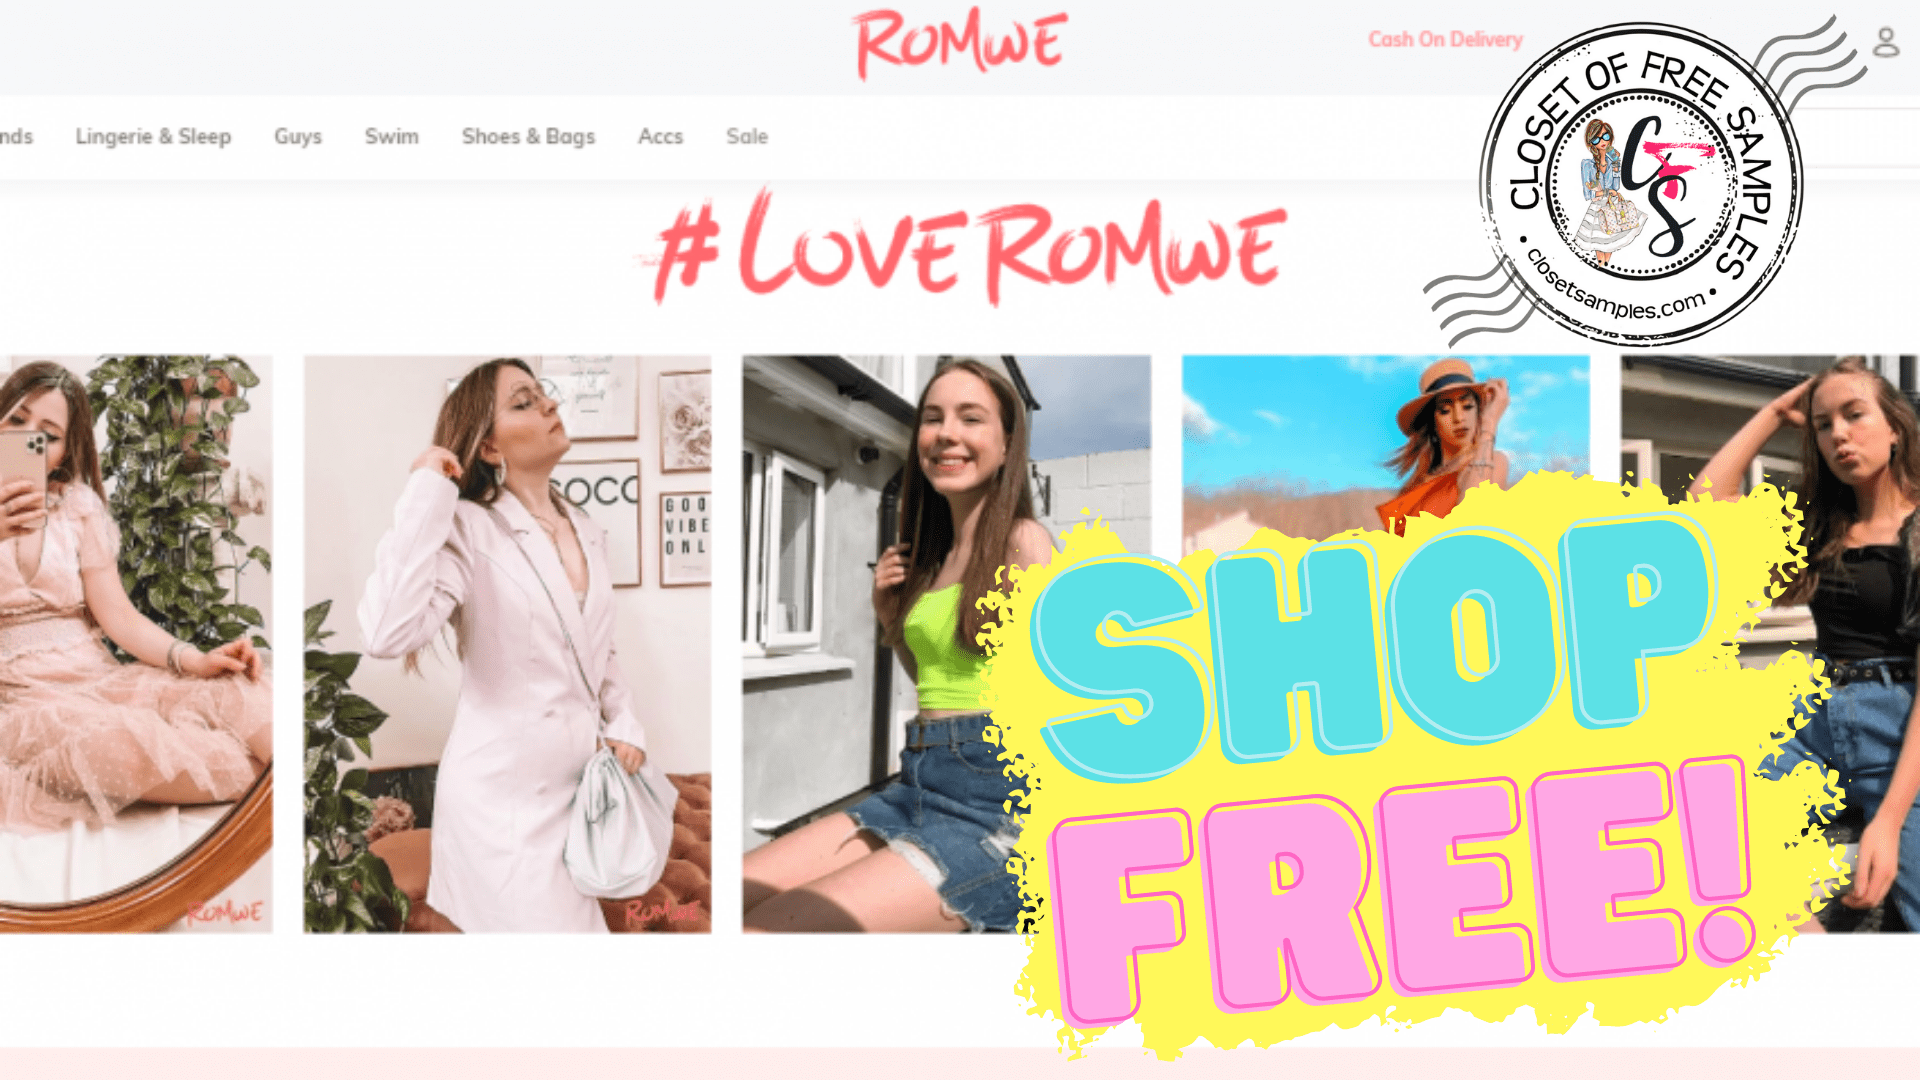 How-to-Get-Free-Clothes-from-ROMWE-Closetsamples.png